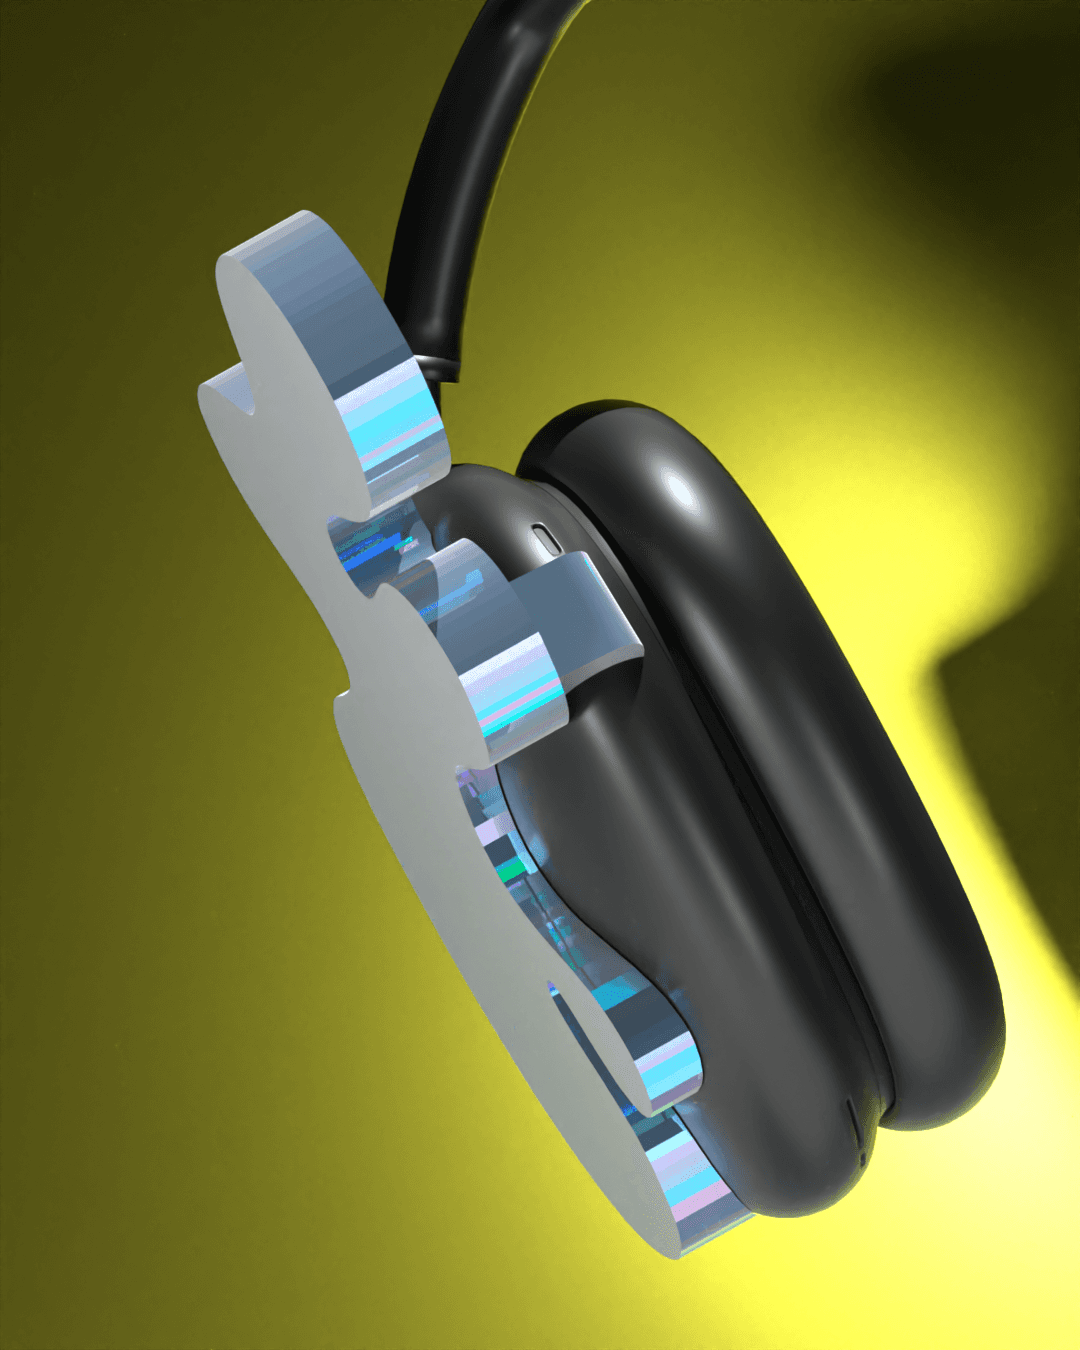 V4 AIRPODS MAX SLIDE-ON ACCESSORY 3d model